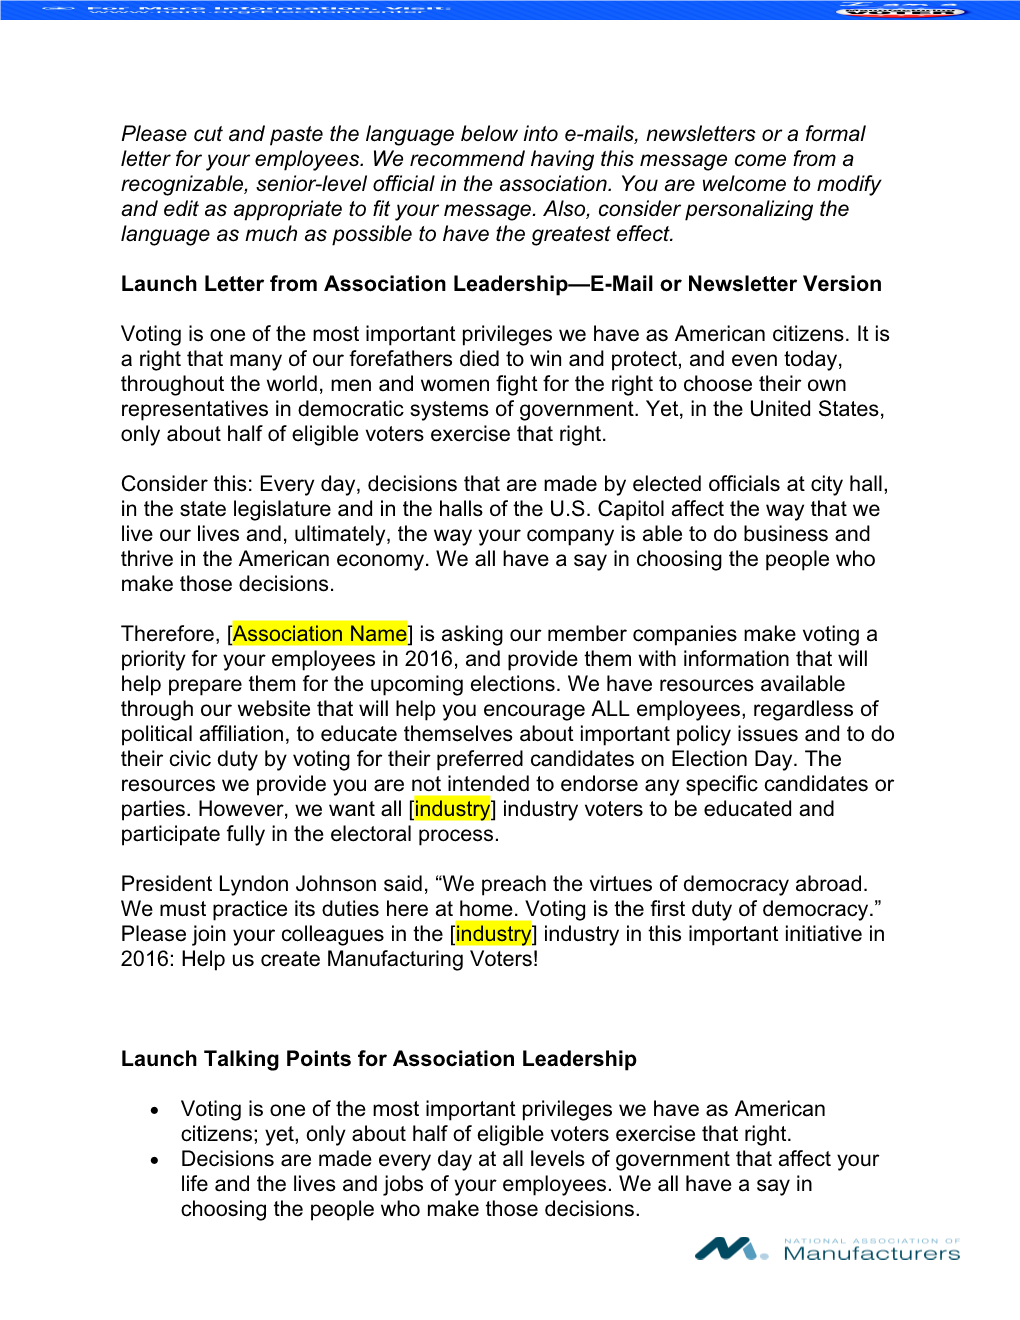 Launch Letter from Association Leadership E-Mail Or Newsletter Version